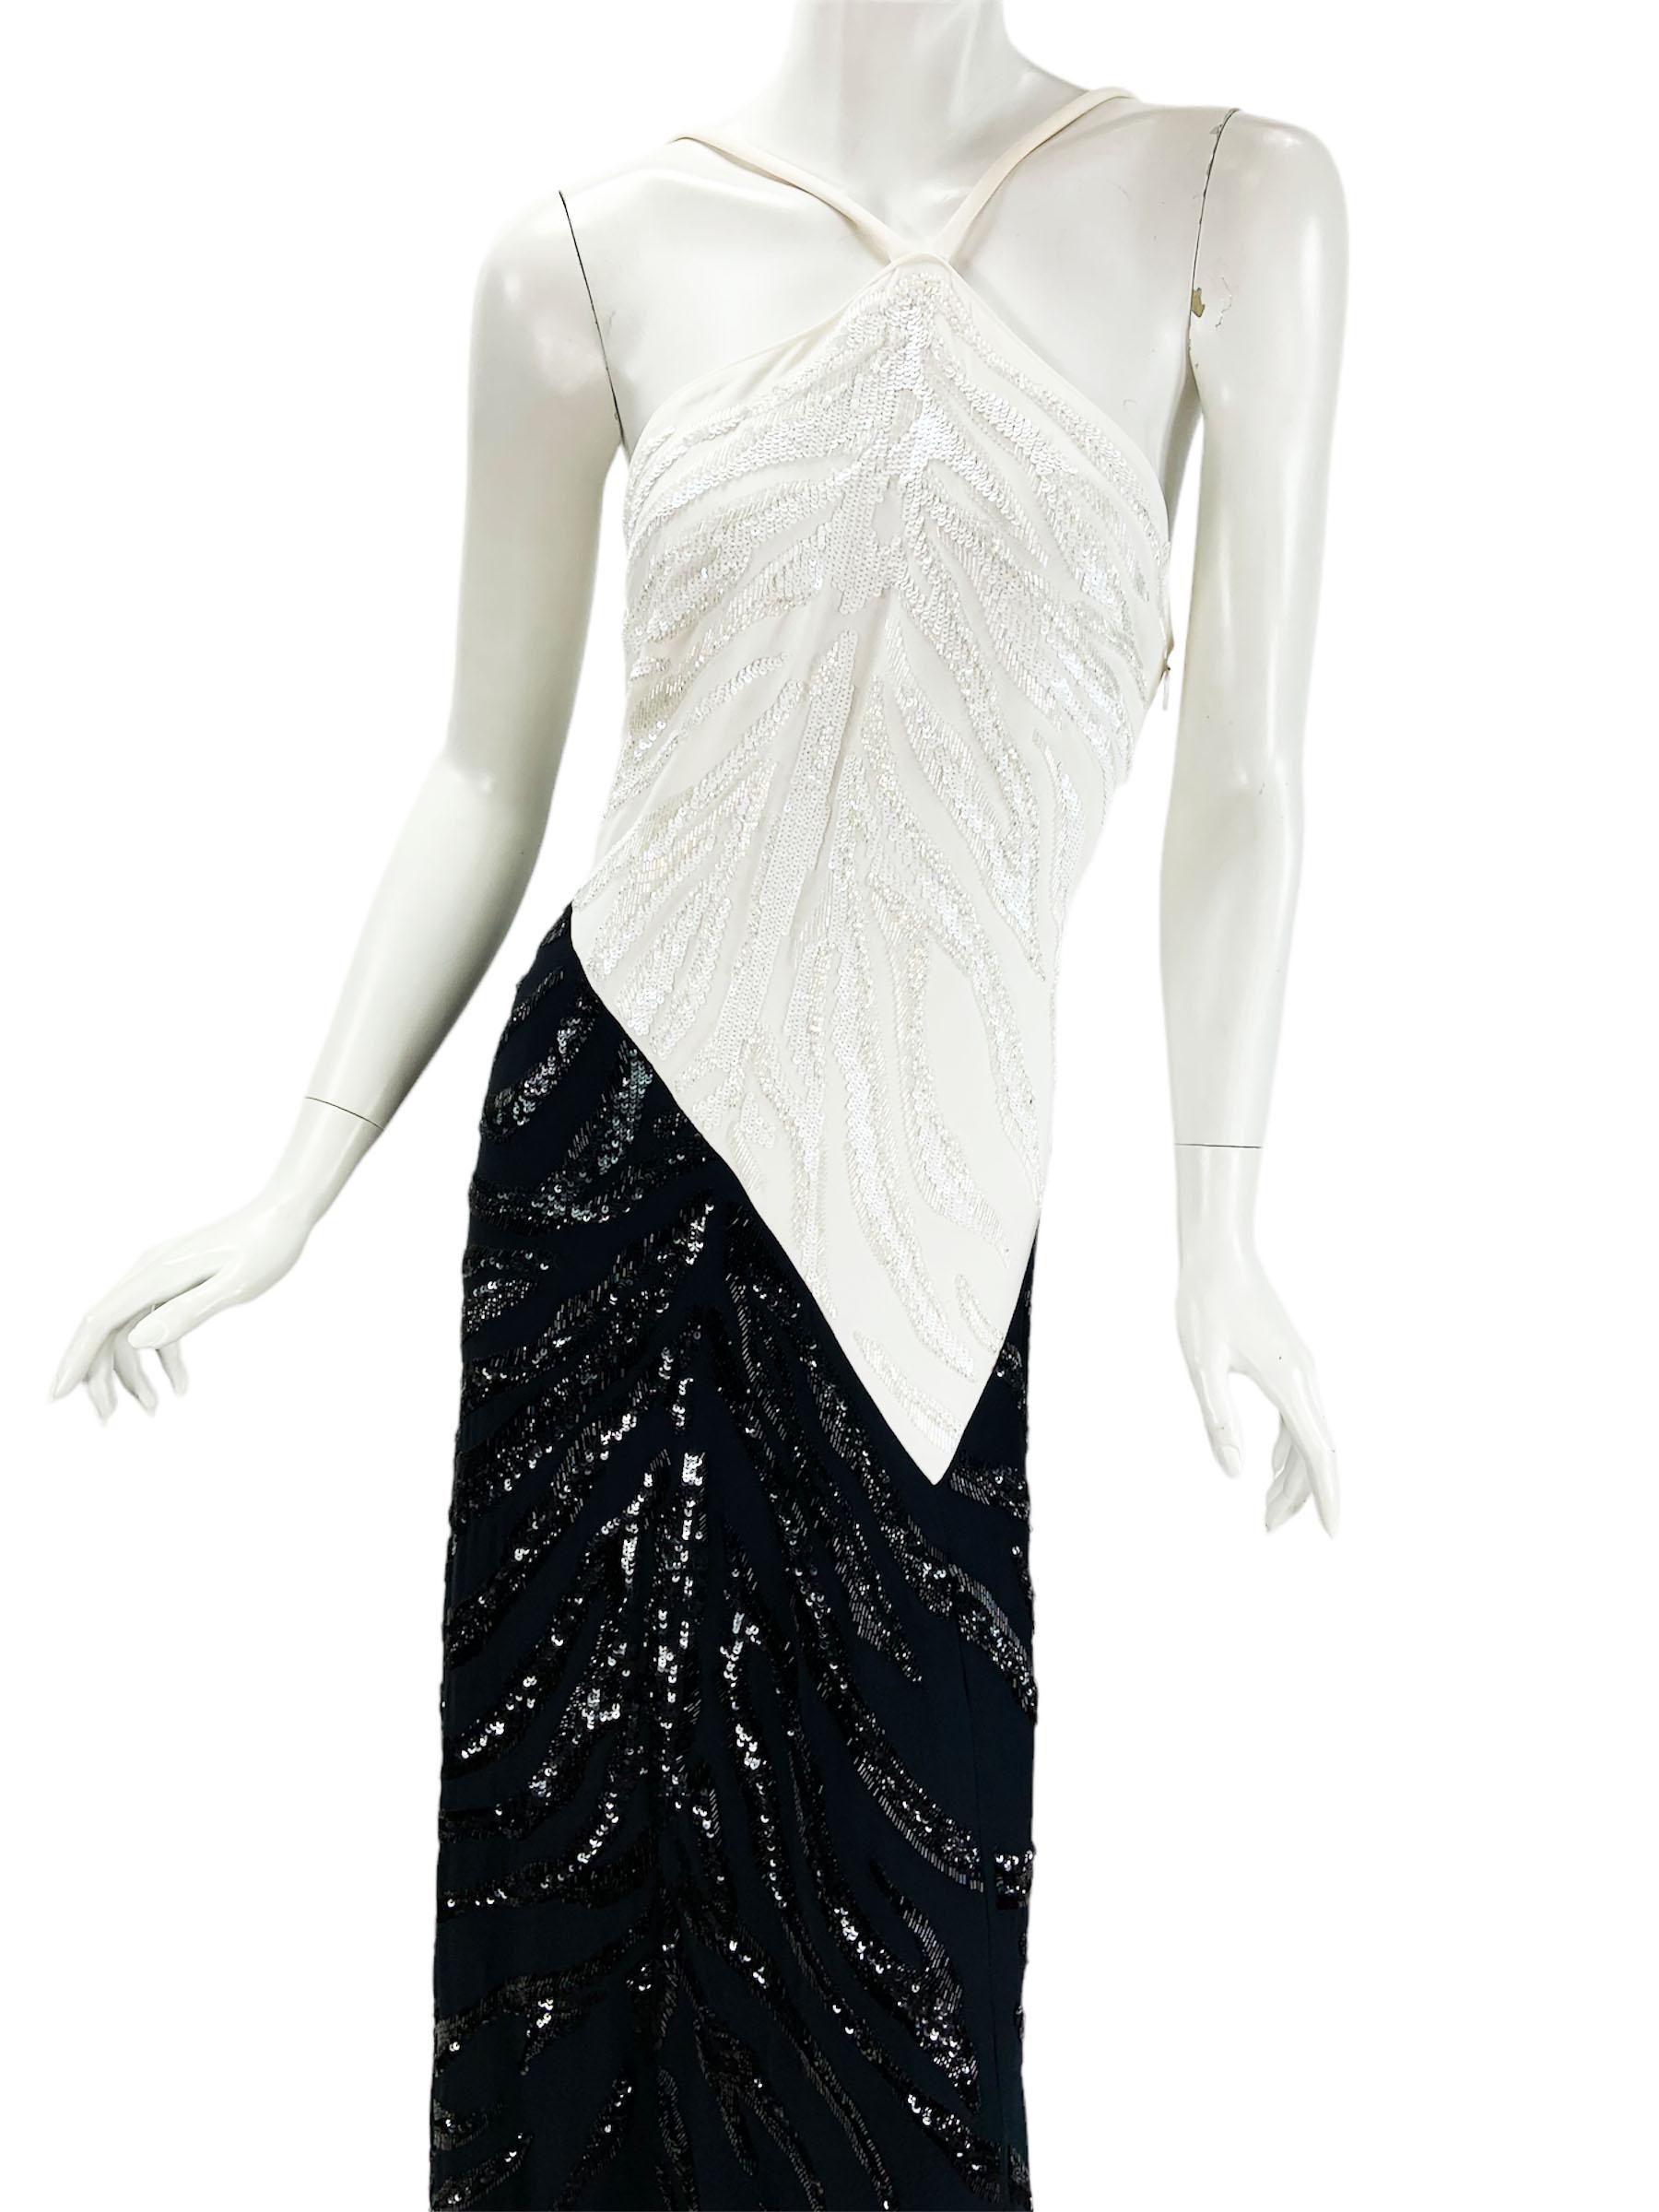 NWT Roberto Cavalli White Black Halter Embellished Maxi Dress Gown It 44 US 8/10 For Sale 2